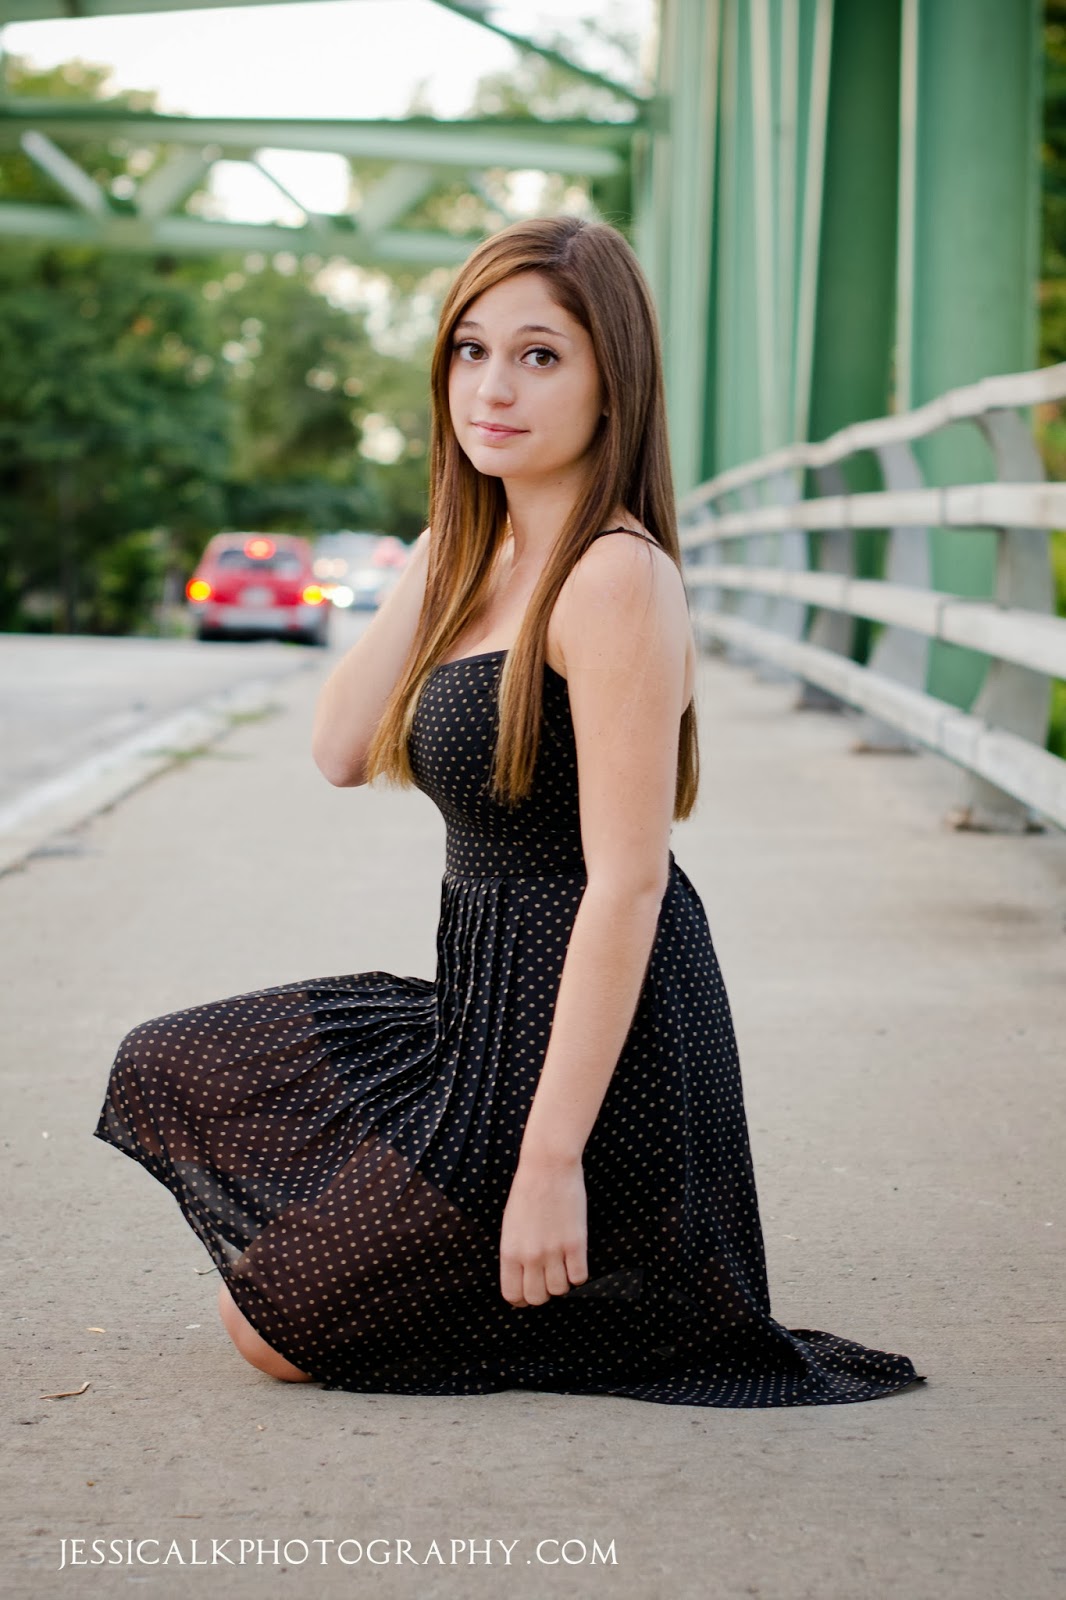 Jessica LK Photography: Emily- Class of 2014!